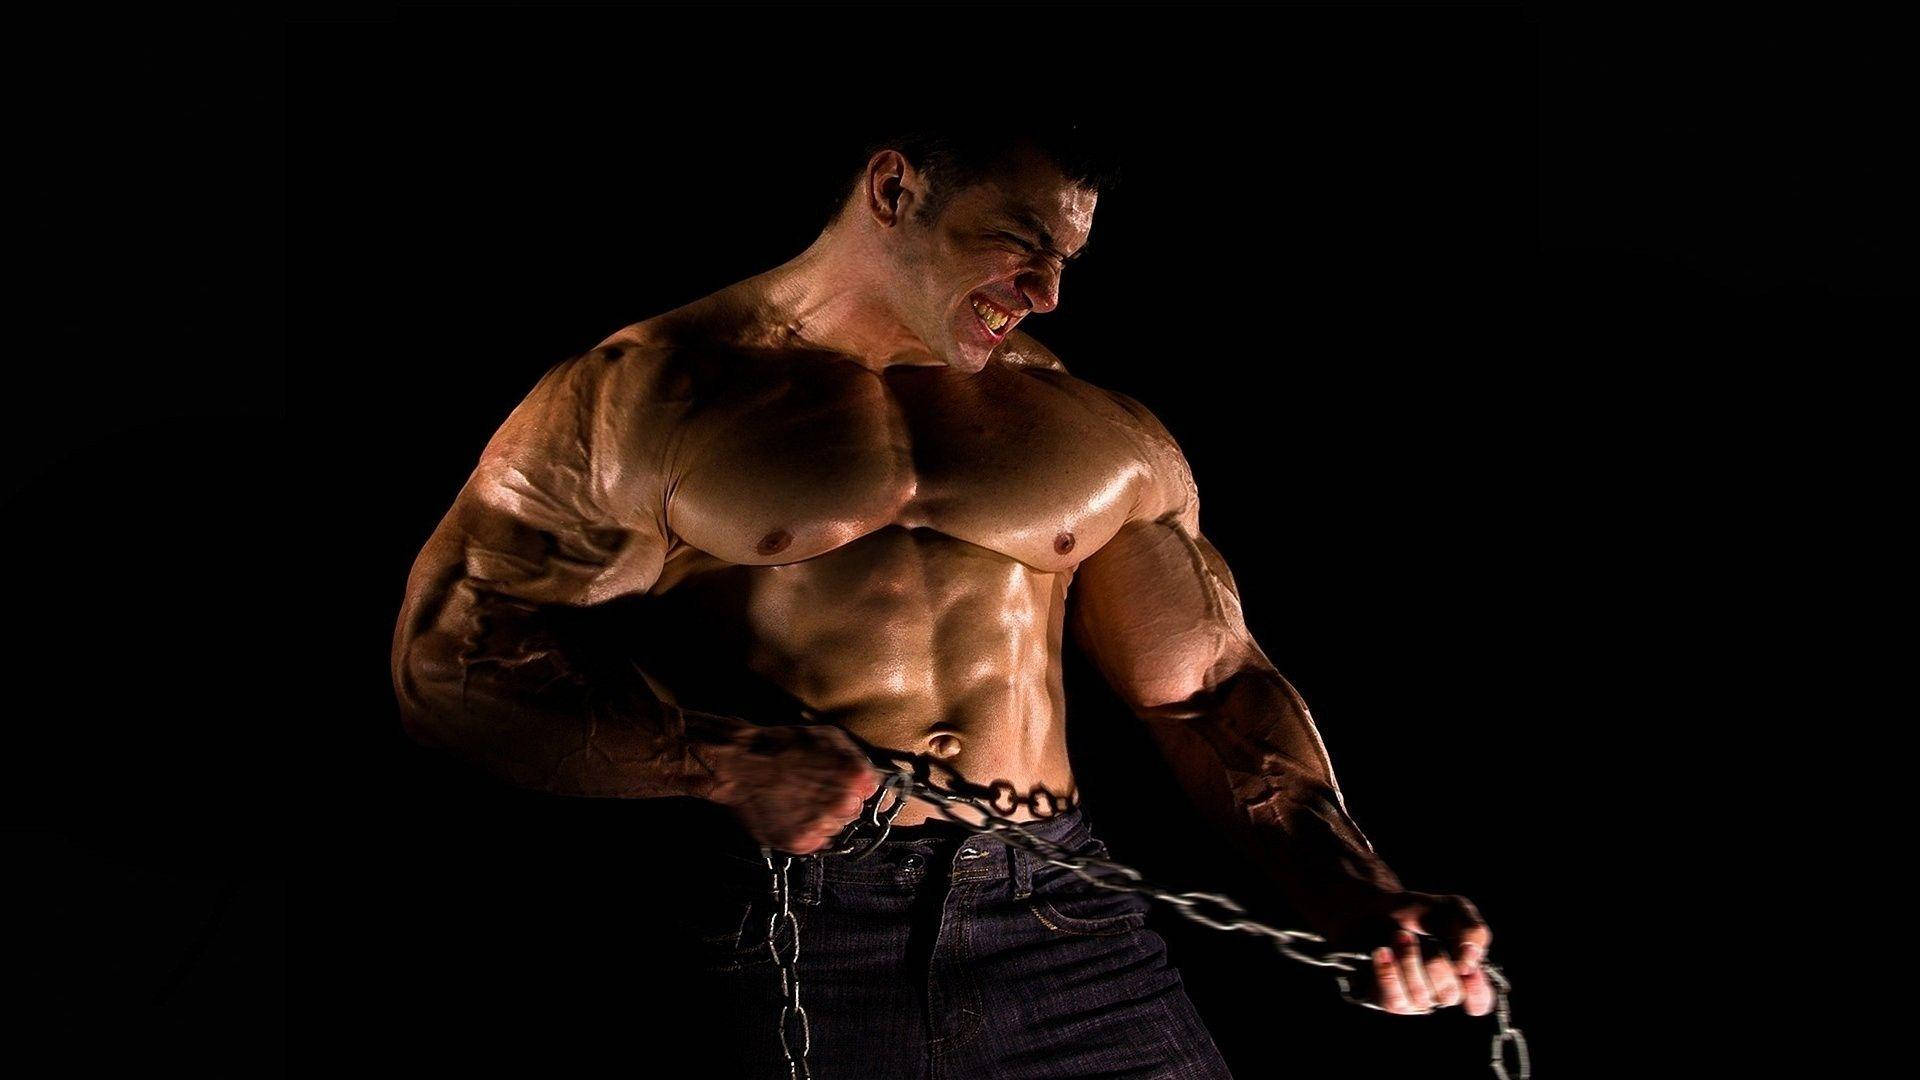 Muscular Man Pulling A Chain Against A Dark Background.